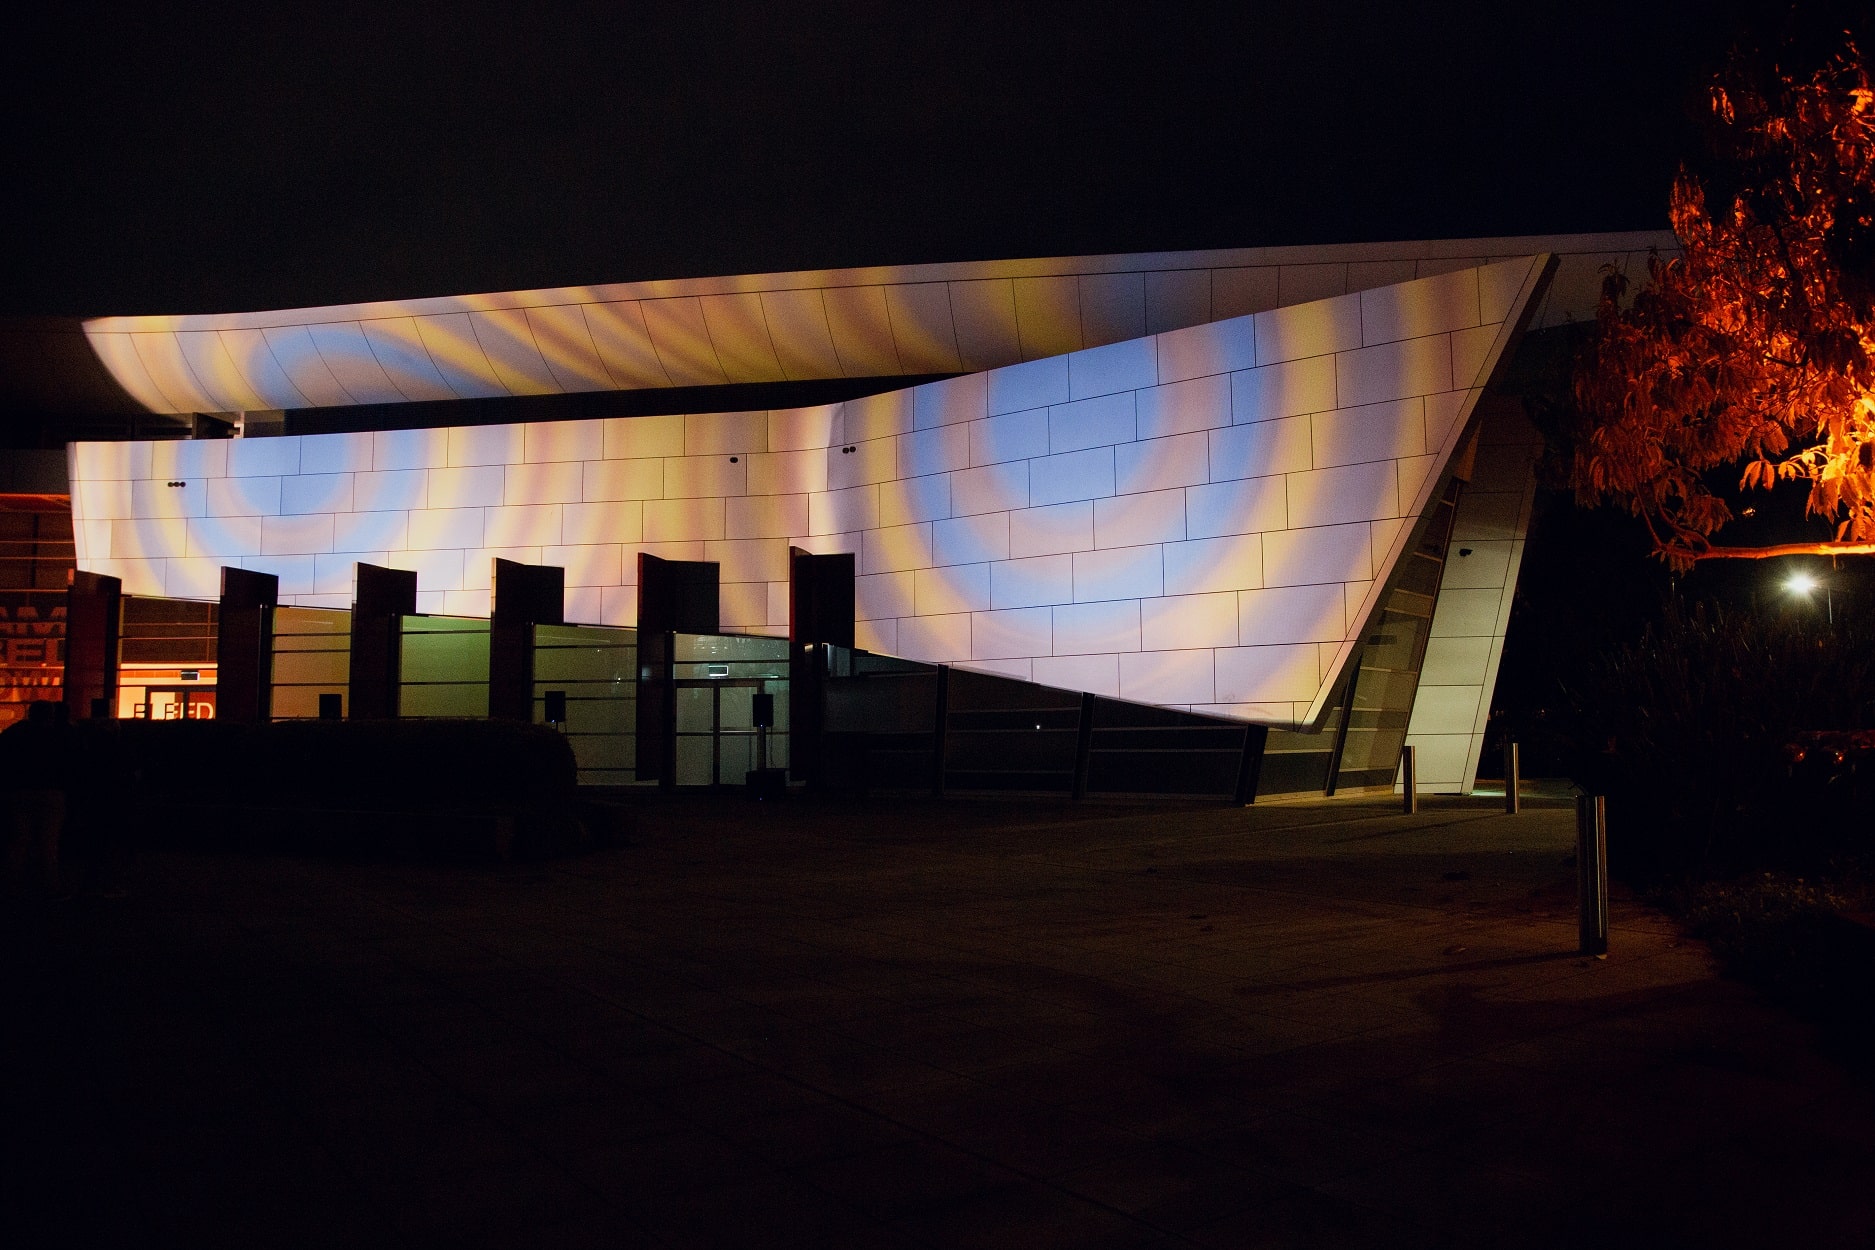 The Campbelltown Arts Centre building with sharp archictectural lines and a rectuacular screen like panel has rings of deep light blue, grey and orange rings projected onto it, with the dark night sky the backdrop to the building.